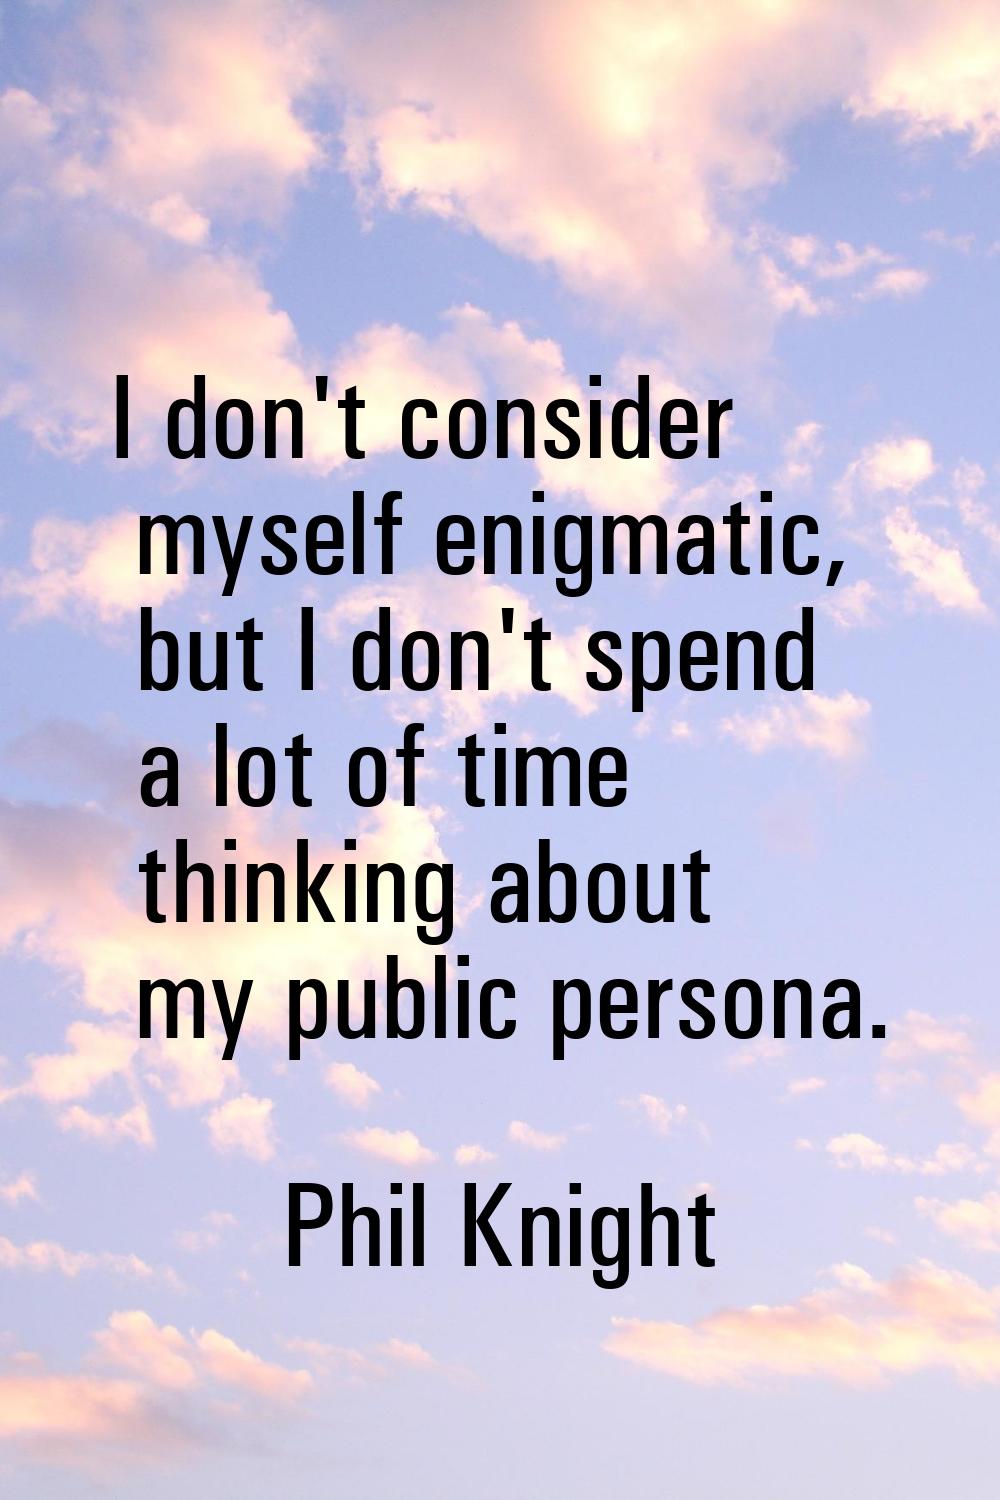 I don't consider myself enigmatic, but I don't spend a lot of time thinking about my public persona